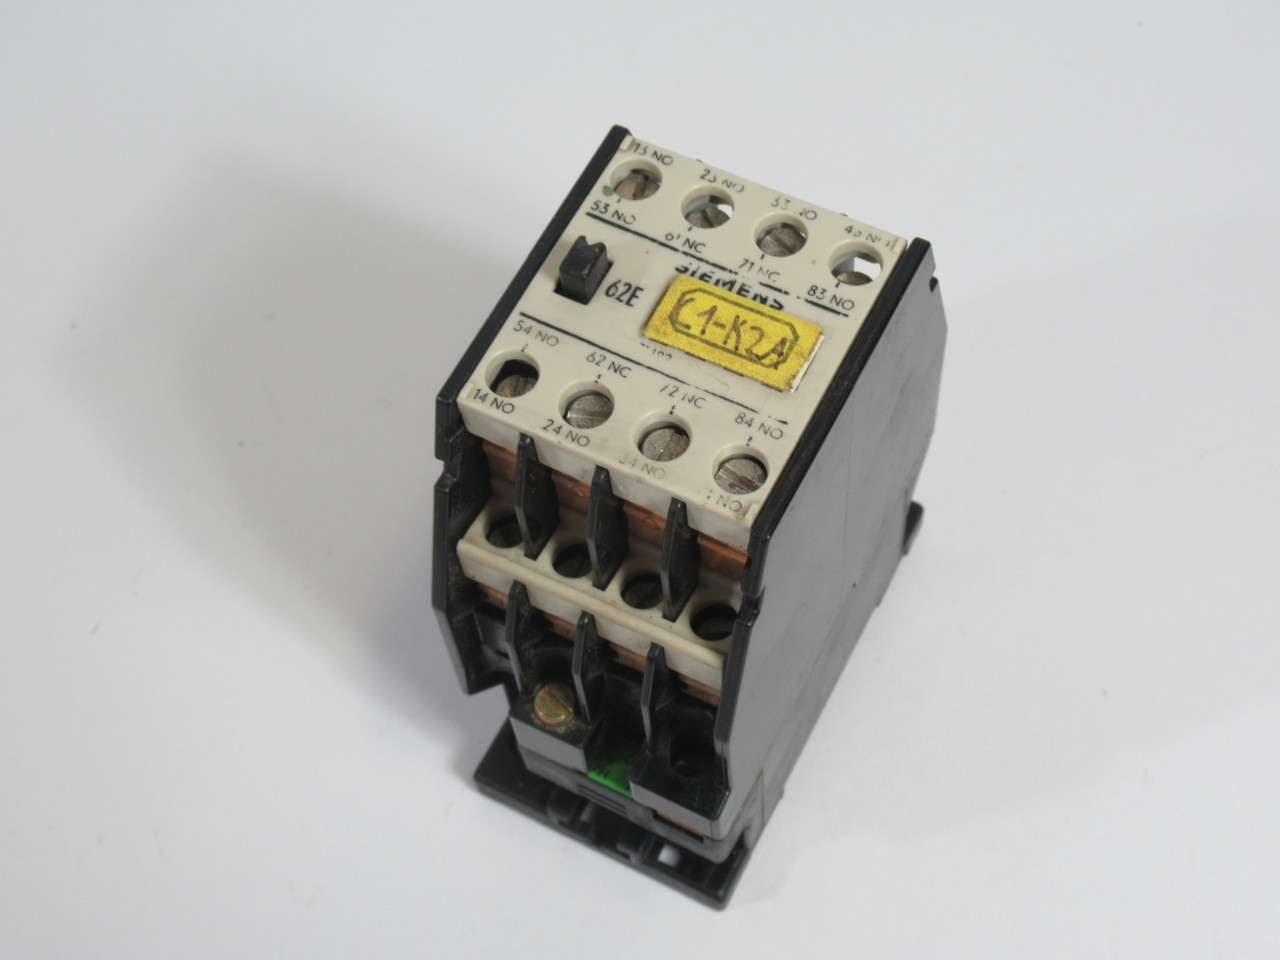 Siemens 3TH8262-0AG2 Contactor 110V@50/60Hz *Missing Din Rail Mount* USED